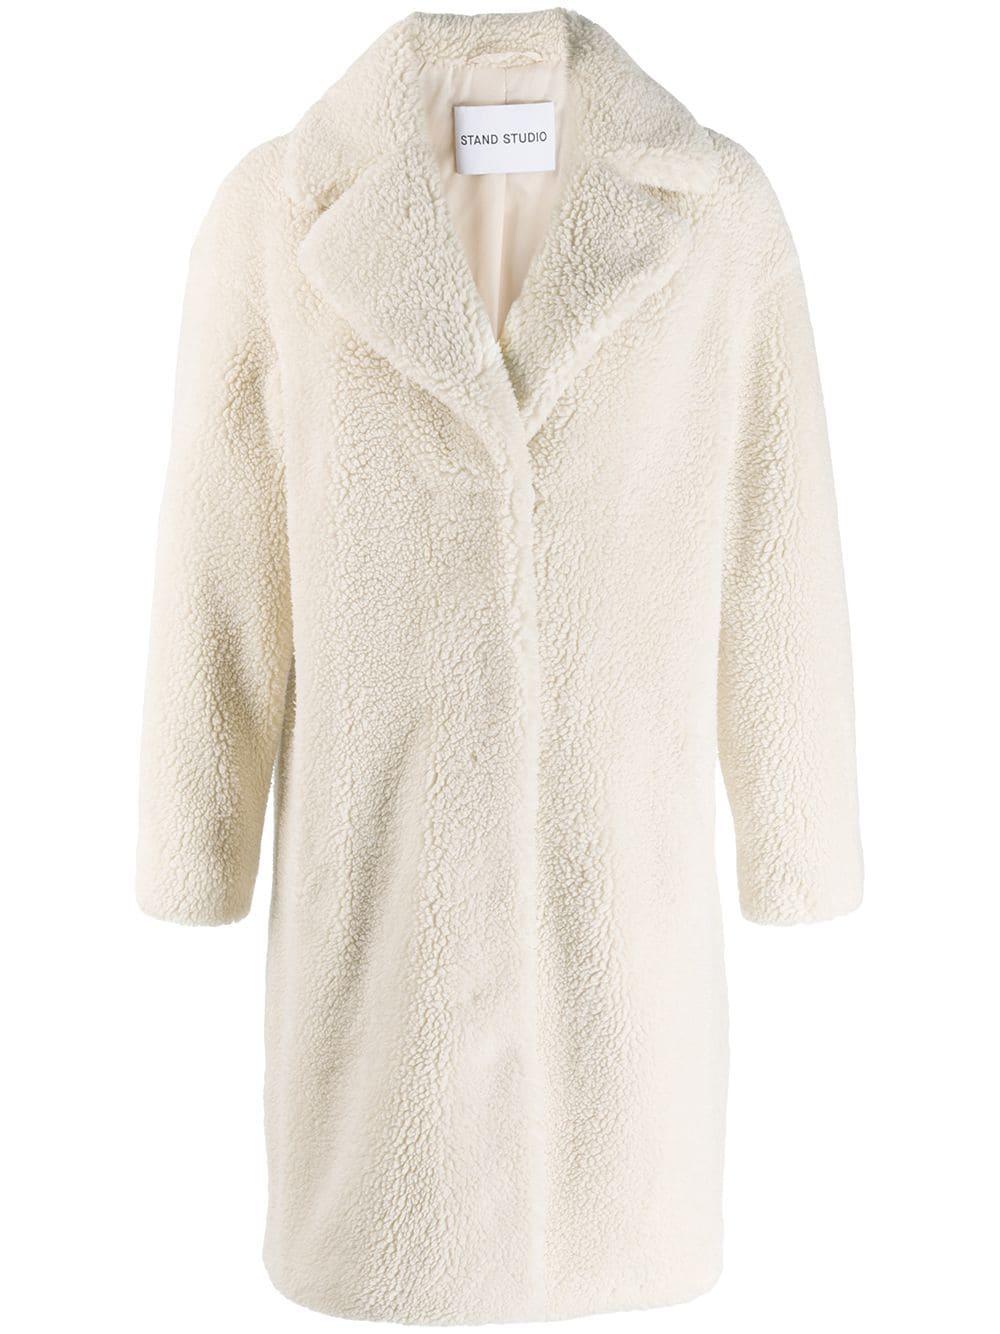 Stand Studio Camille Cocoon Coat in White - Lyst